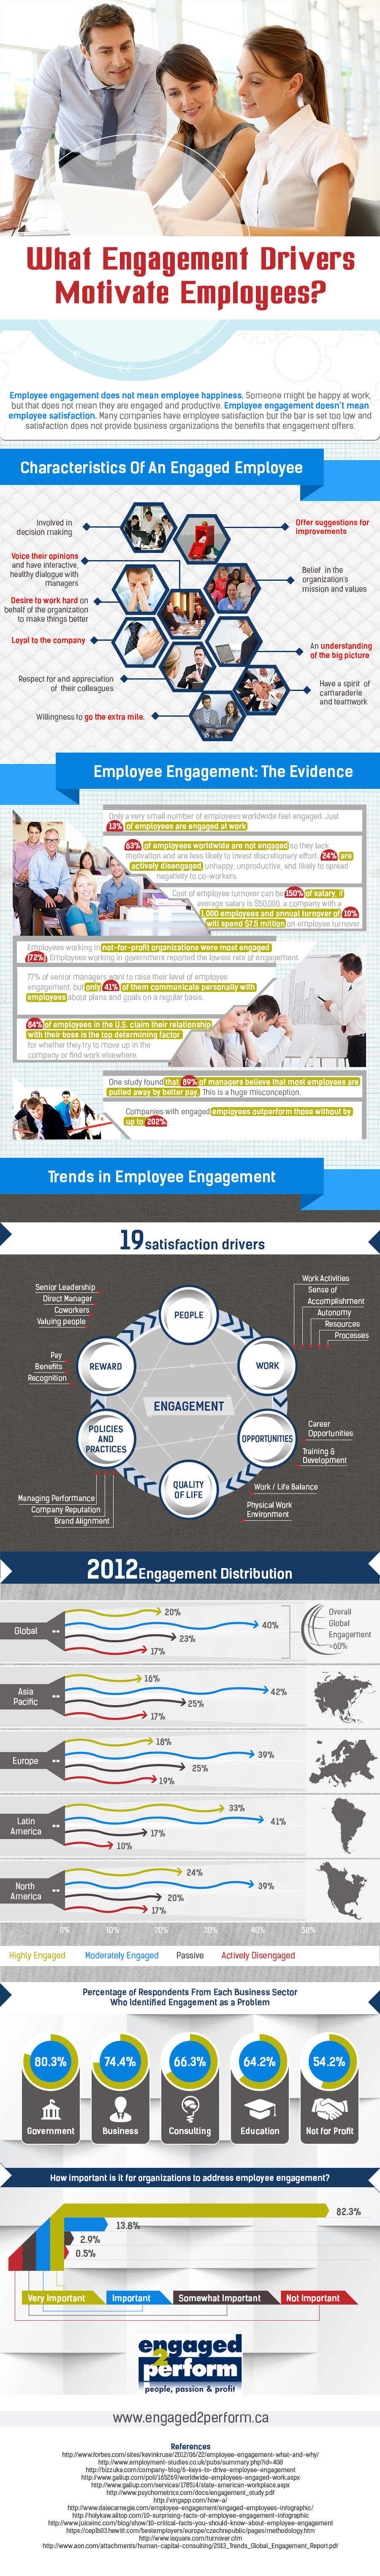 What Engagement Drivers Motivate Employees - Engaged 2 Perform